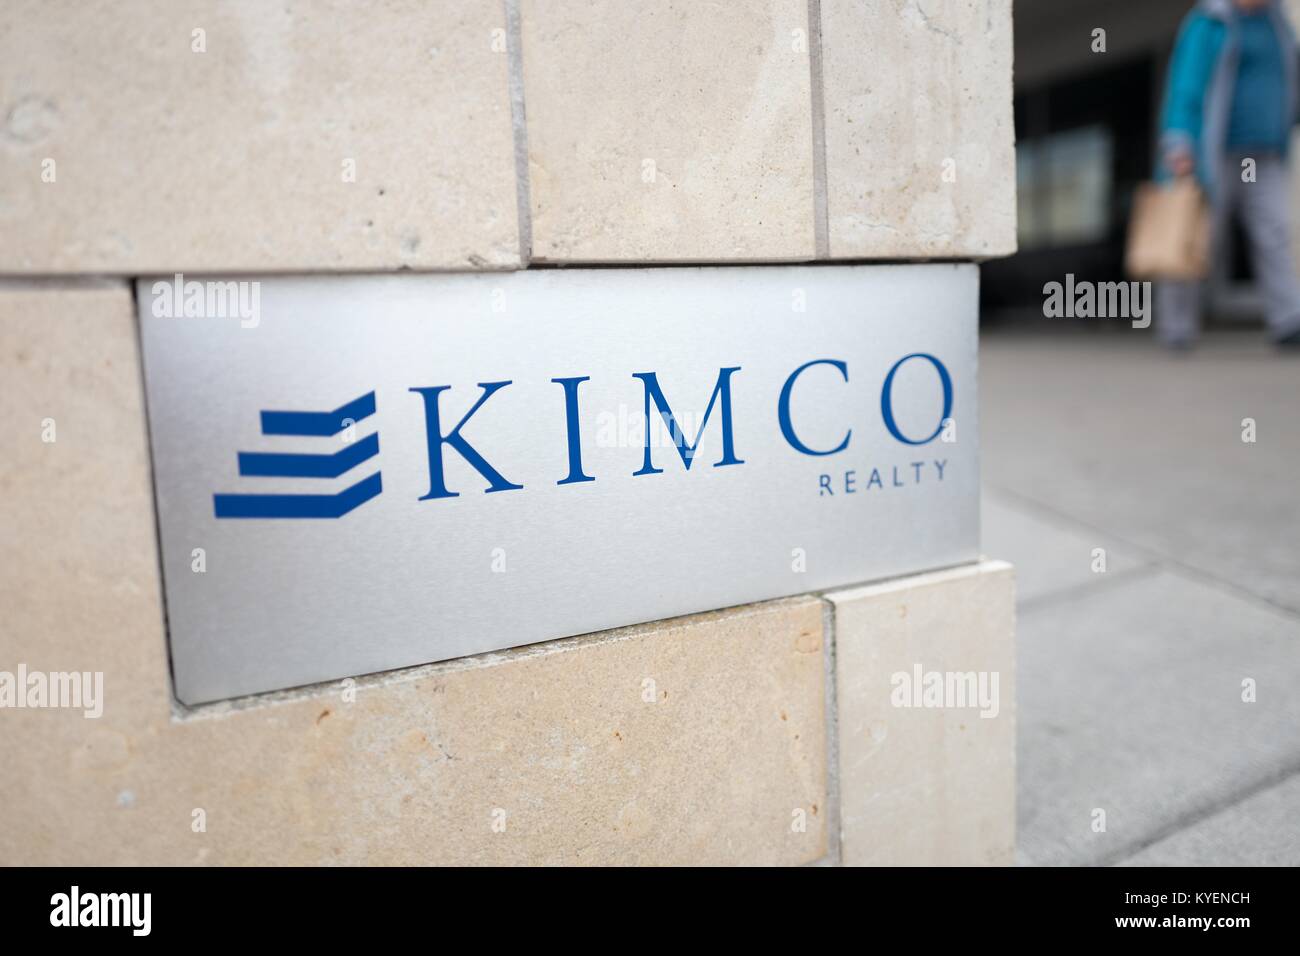 Close-up of sign for Kimco Realty, a real estate investment trust which is among the largest publicly-traded operators of open-air shopping malls, in the San Francisco Bay Area town of Daly City, California, November 3, 2017. () Stock Photo